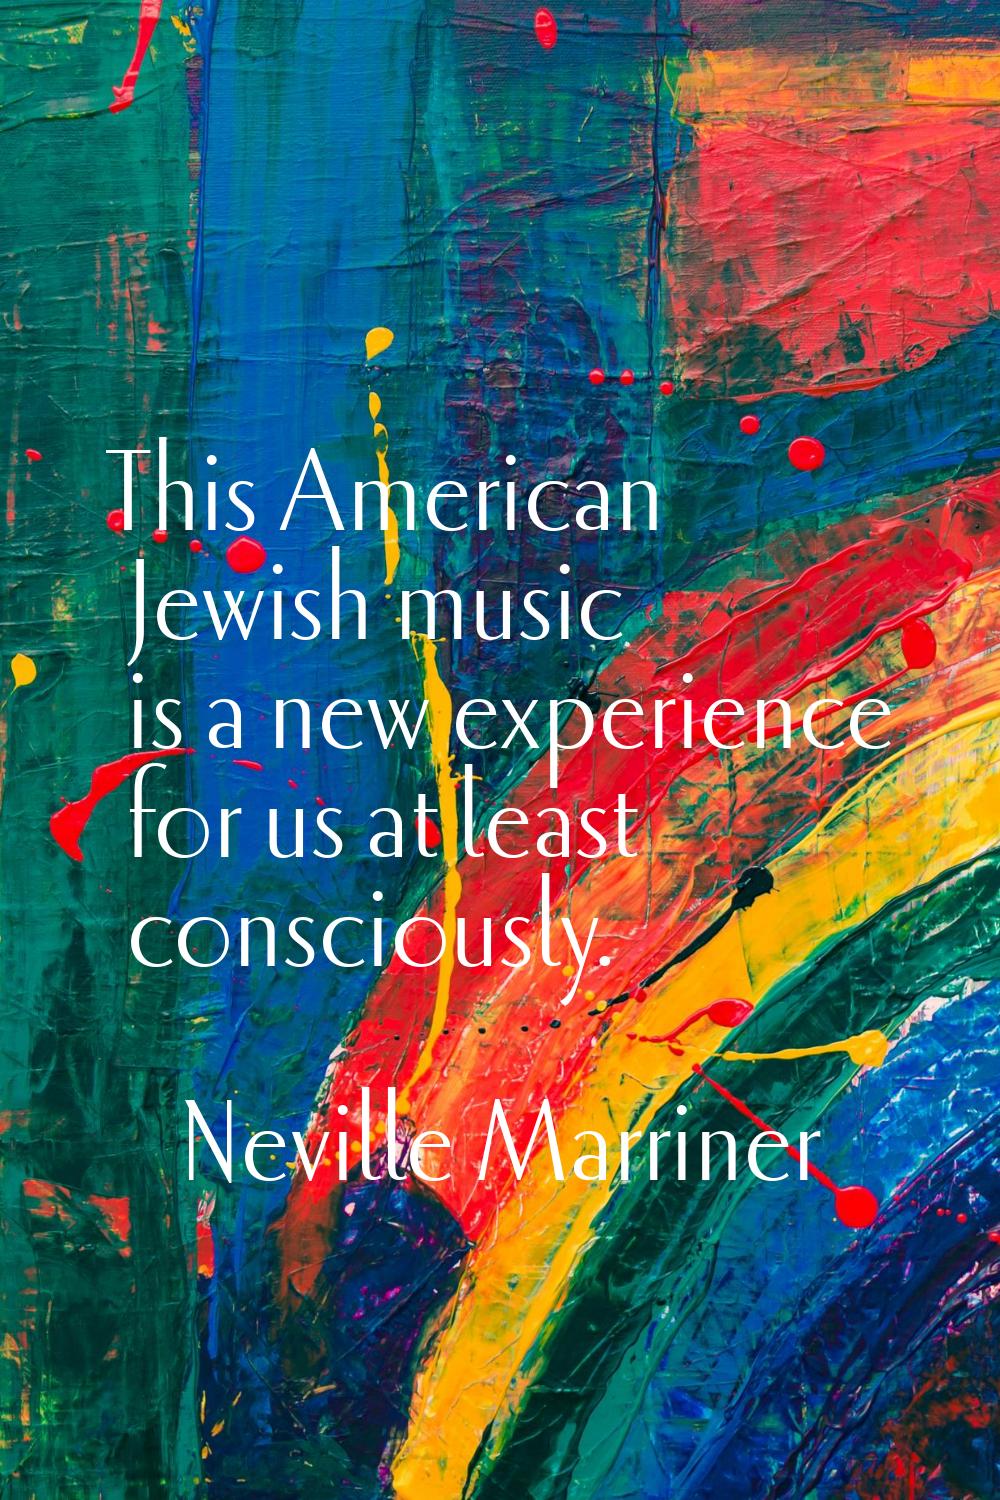 This American Jewish music is a new experience for us at least consciously.